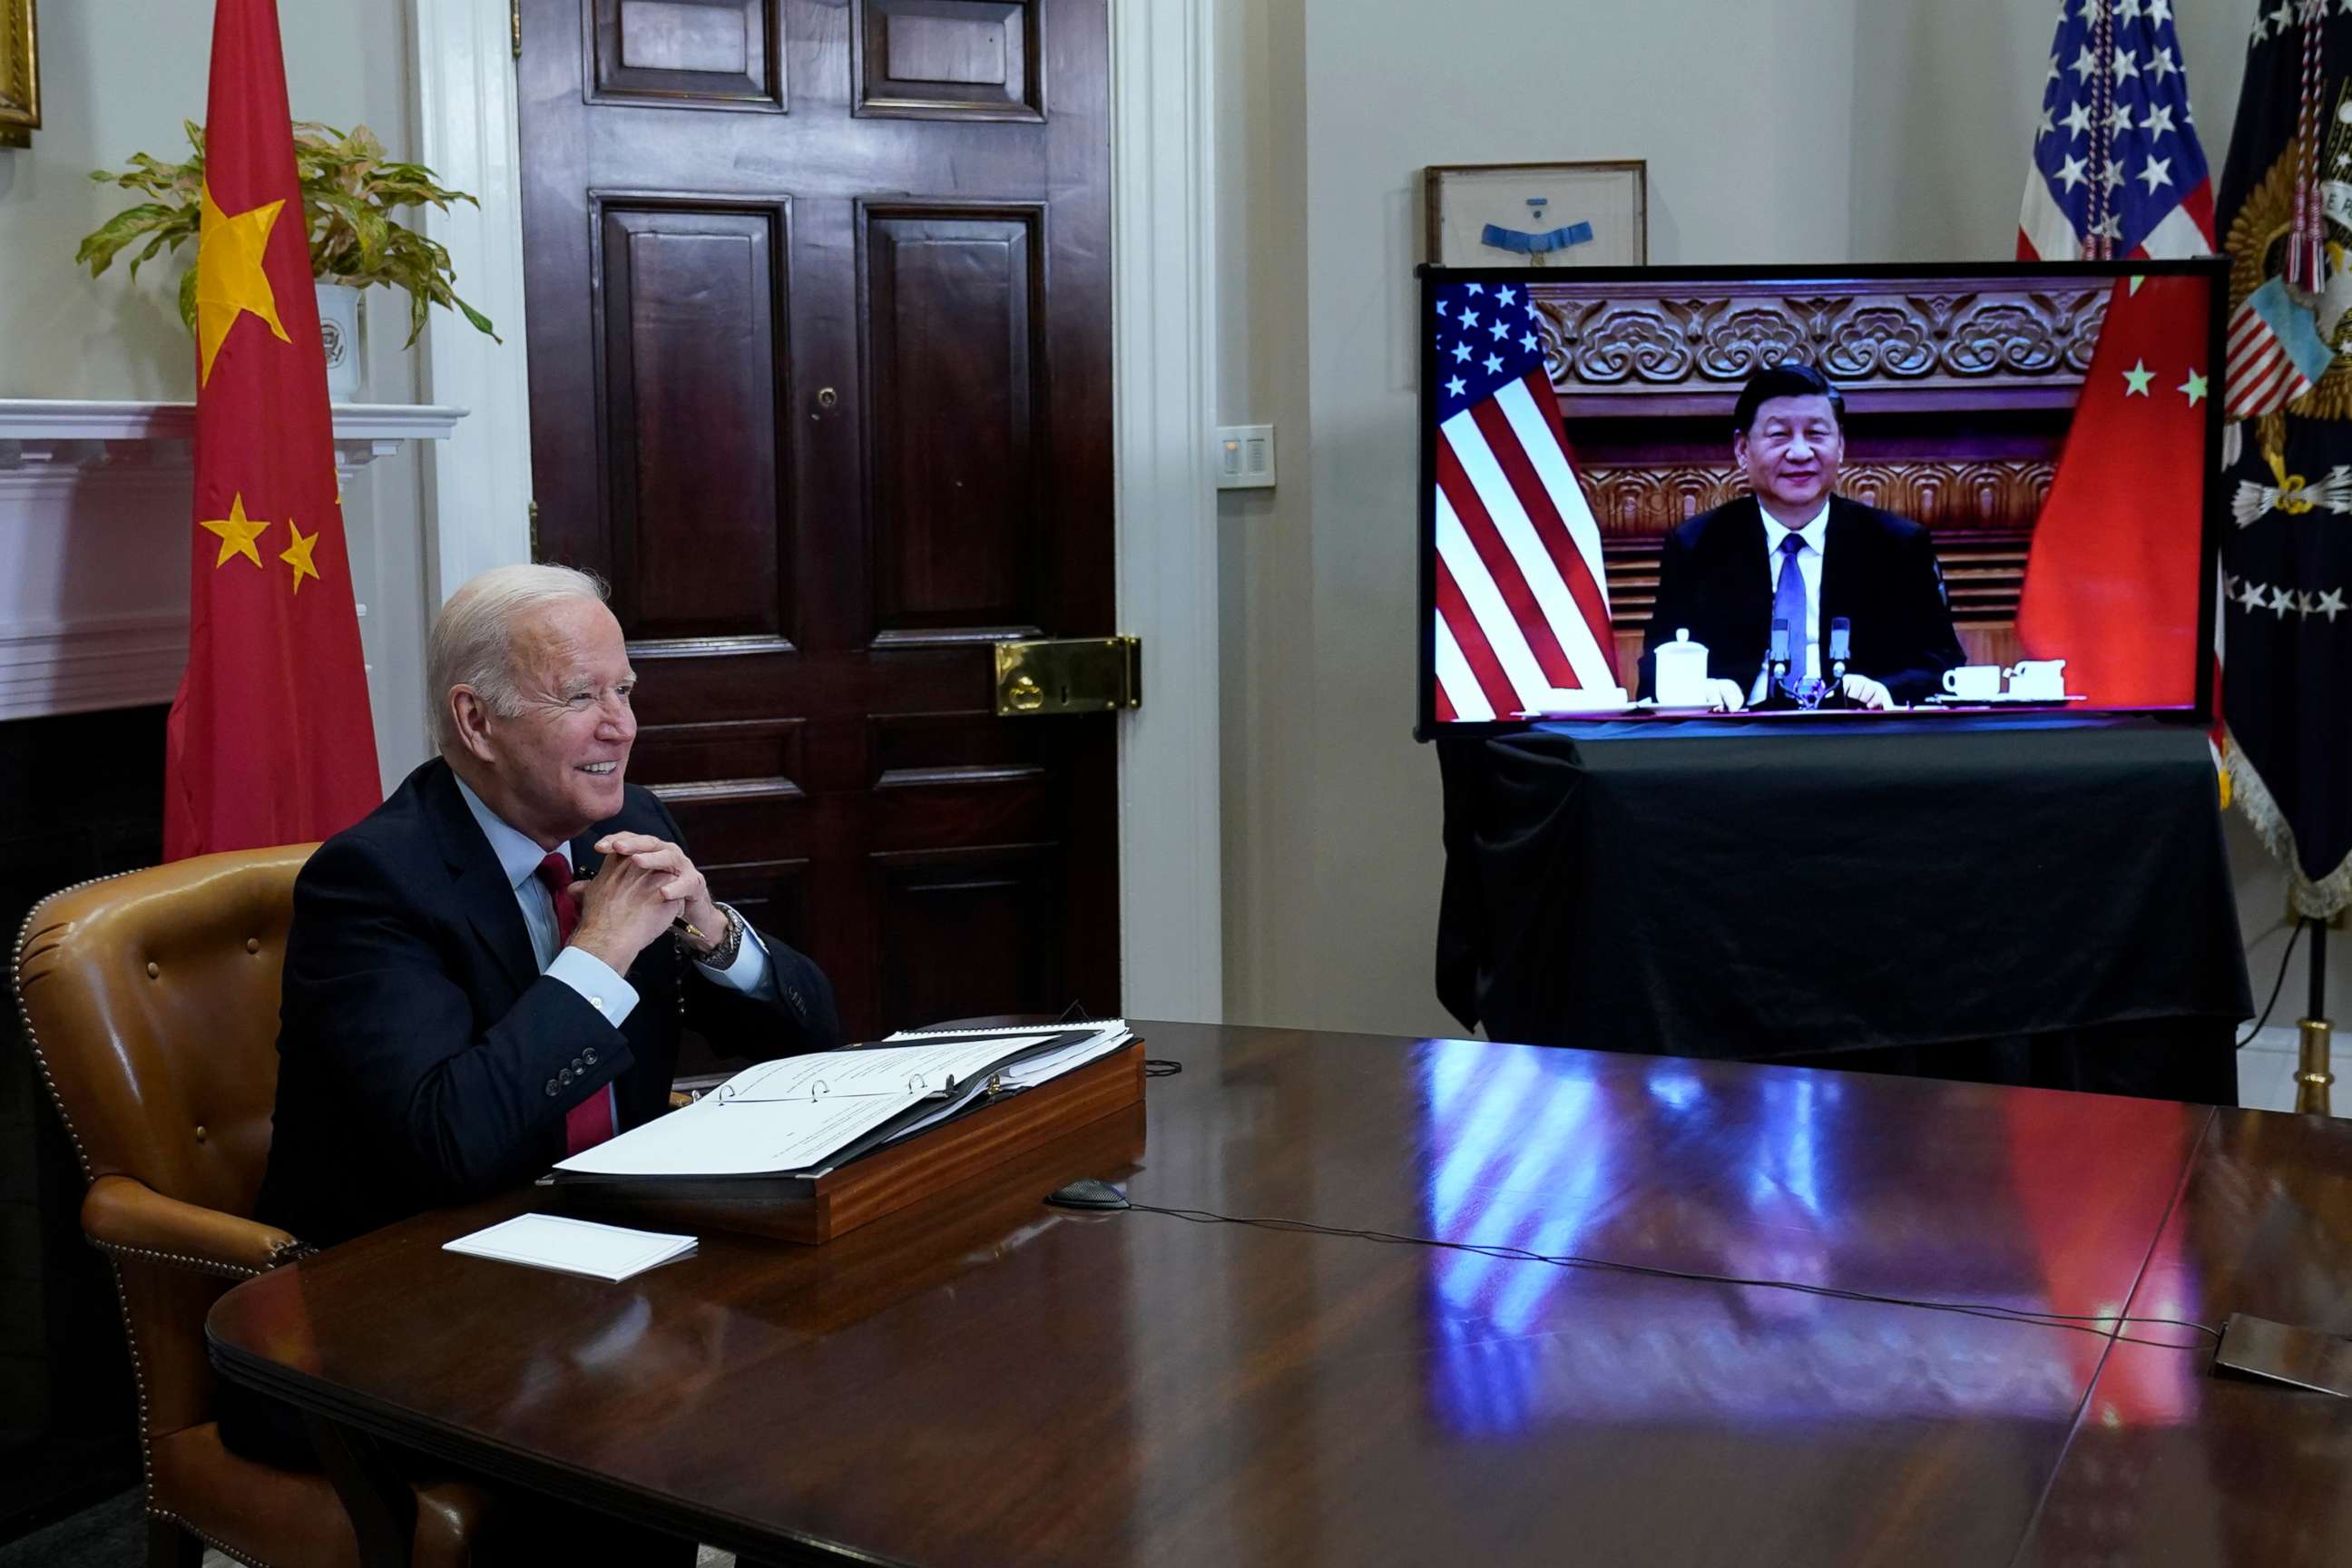 PHOTO: President Joe Biden, left, speaks as he meets virtually with Chinese President Xi Jinping, on screen, from the Roosevelt Room of the White House, Nov. 15, 2021.